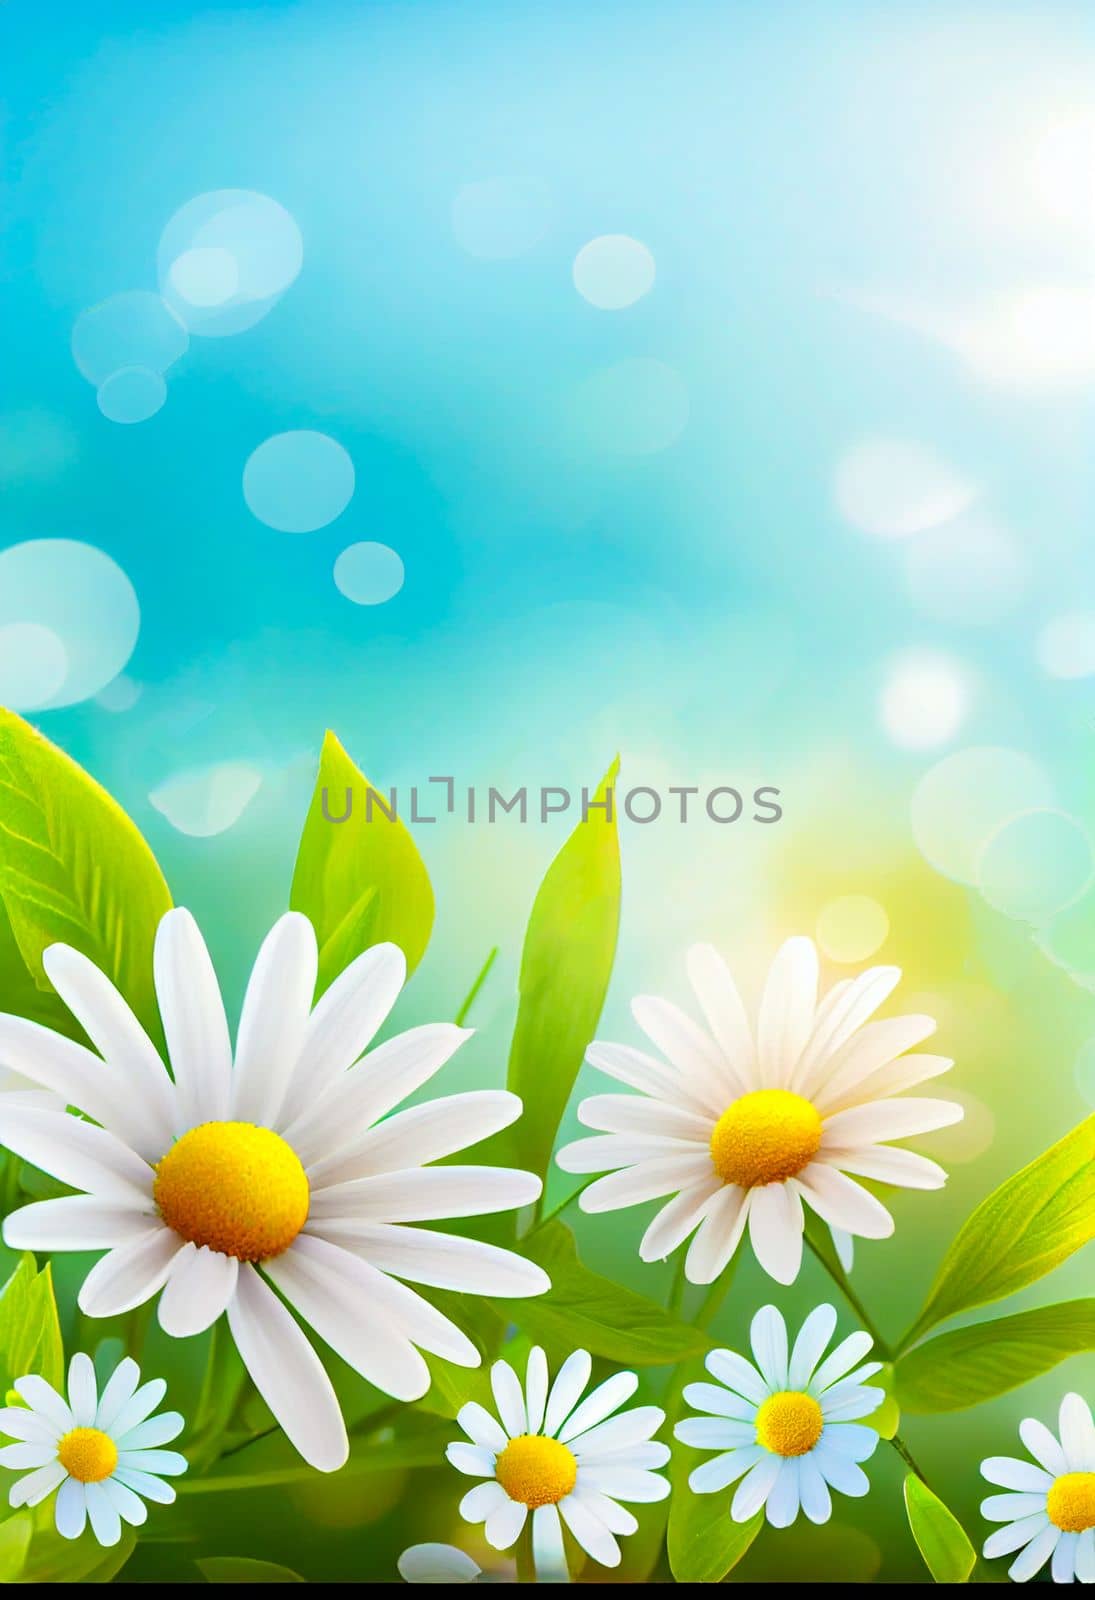 Sunny day background with daisies and leaves, copy space for your text. by FokasuArt